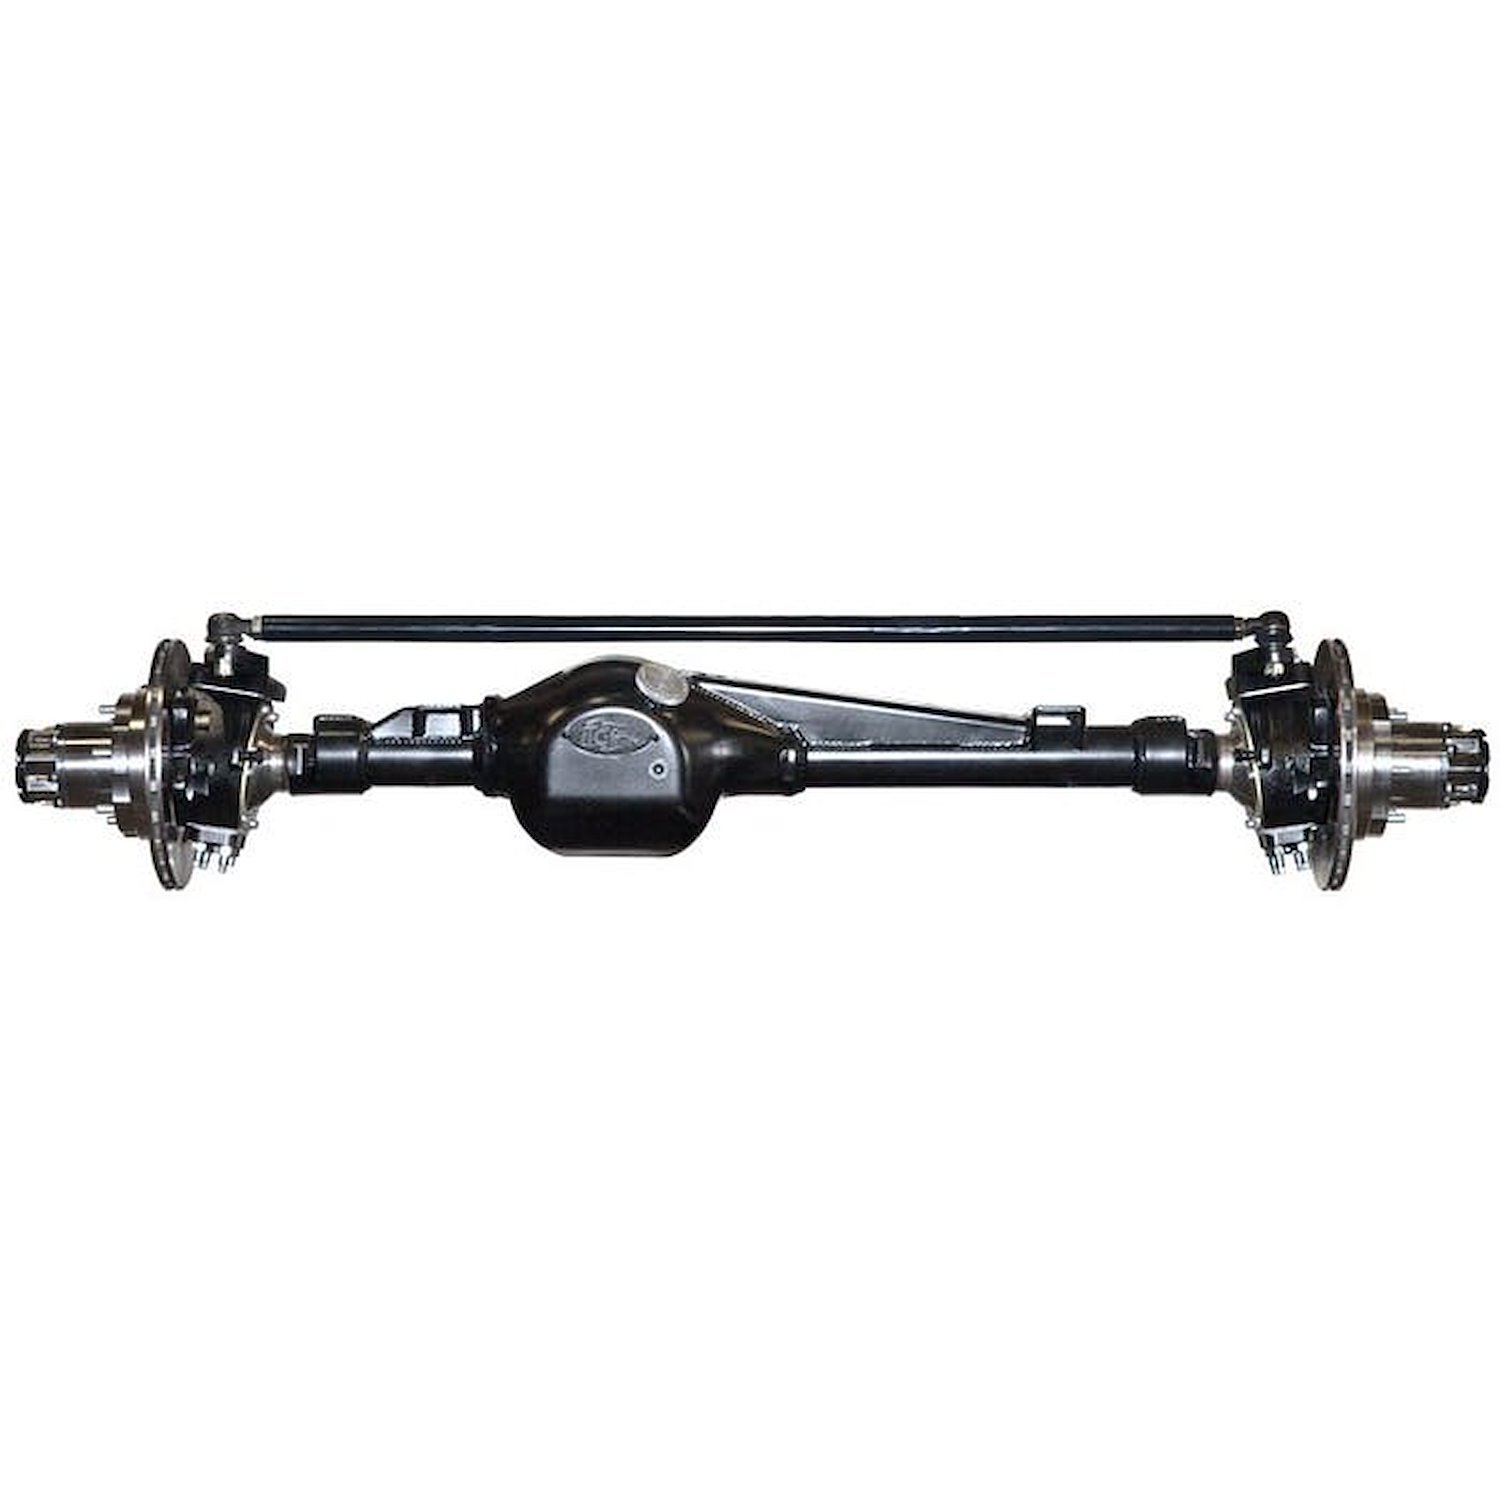 301659-1-KIT Rock Assault Fully-Built Front Axles, +5 Width, LHD, High-Pinion, 5.29, Grizzly, Locking Hubs, Toyota